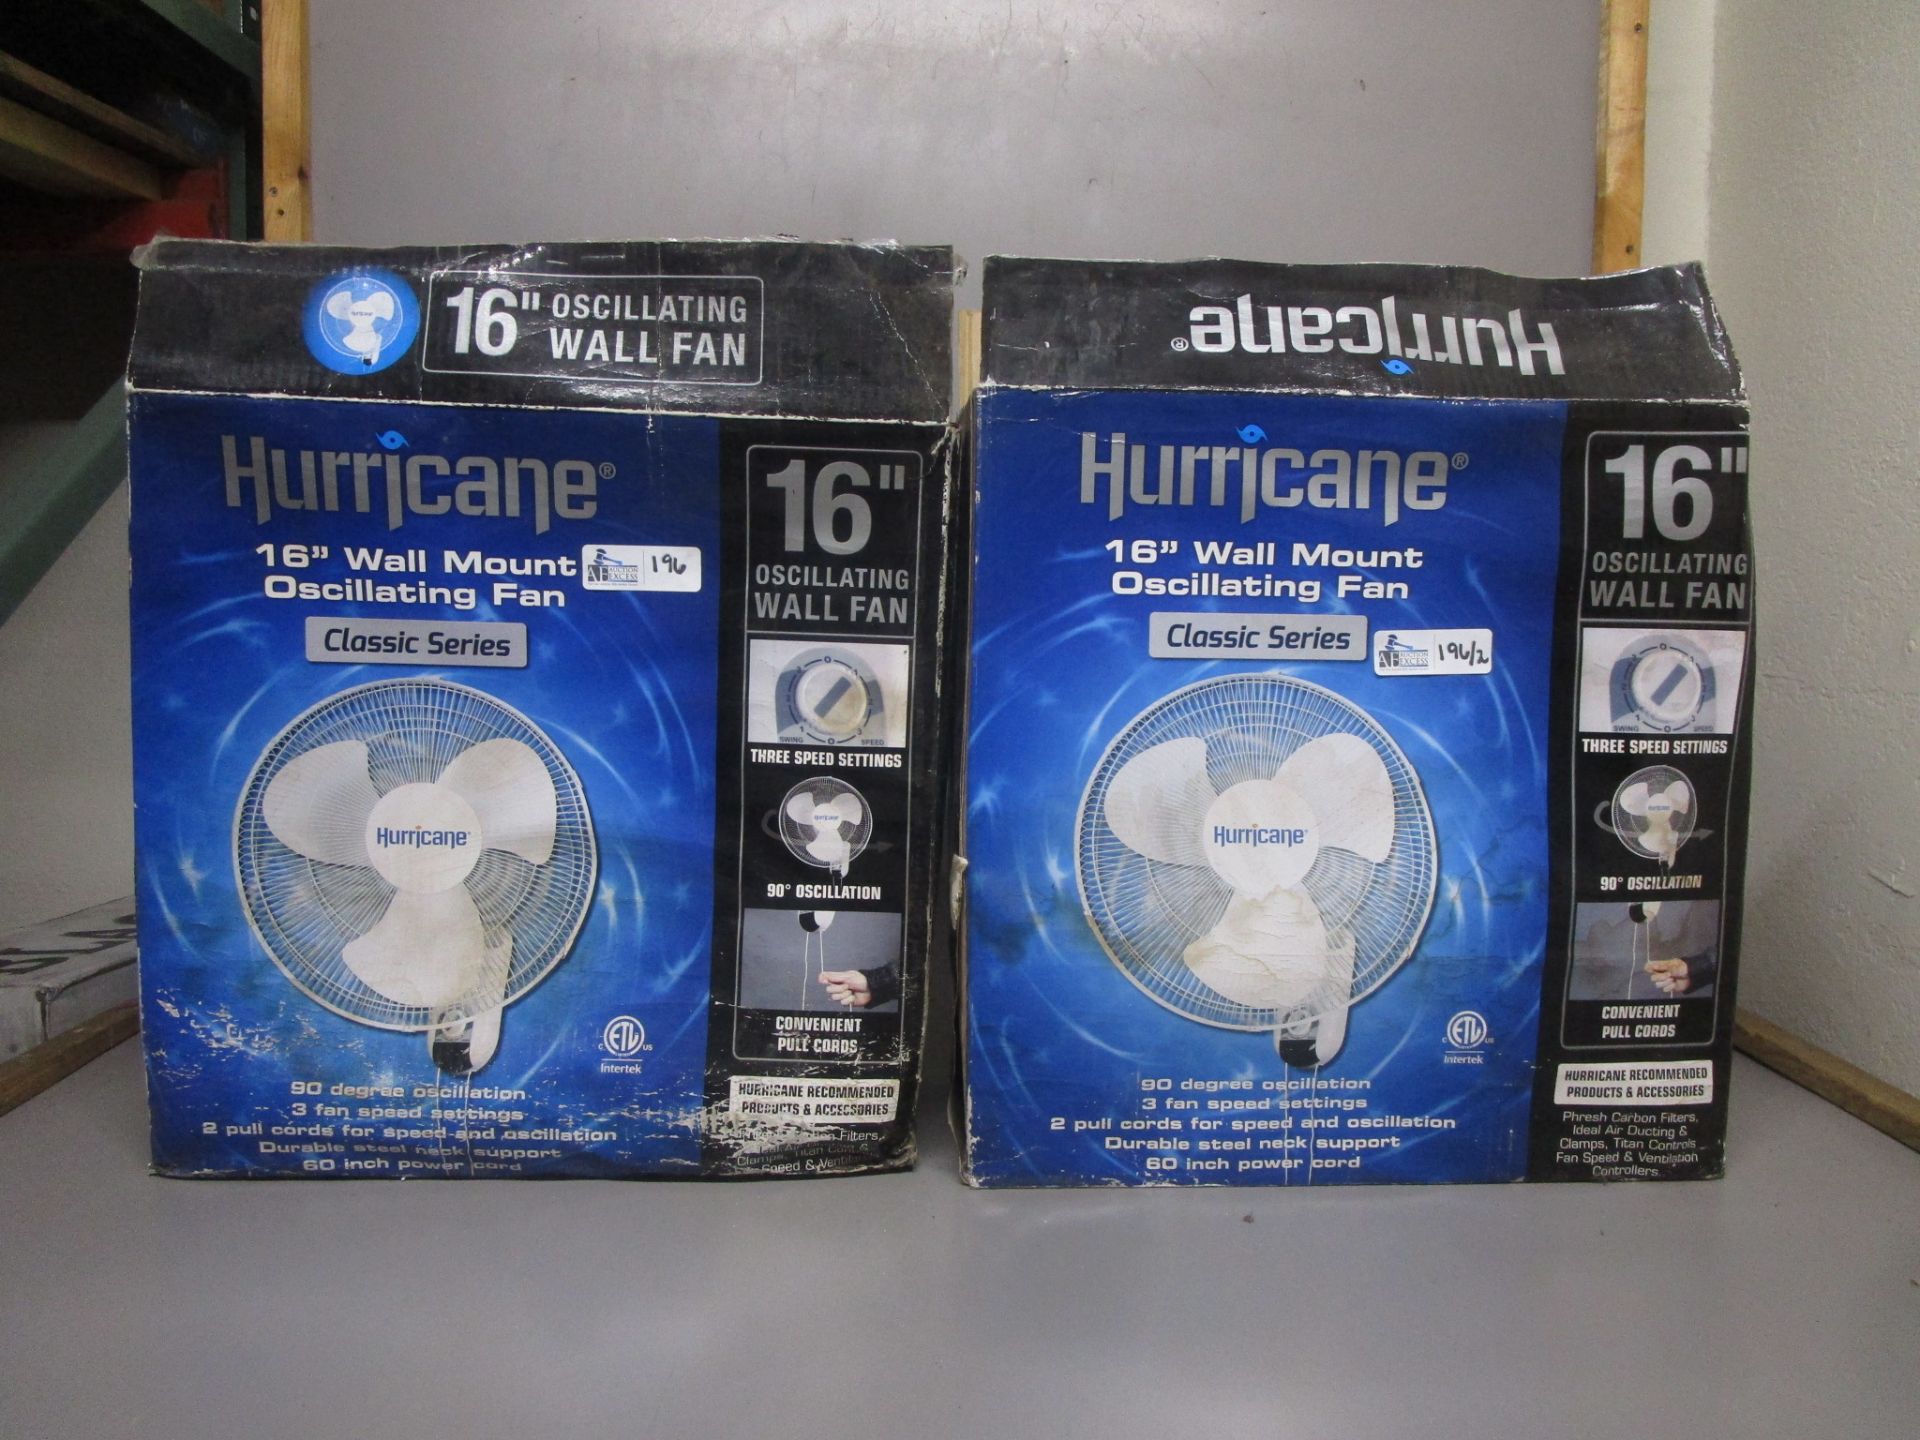 LOT OF 2 HURRICANE WALL FANS IN ORIGINAL BOXES